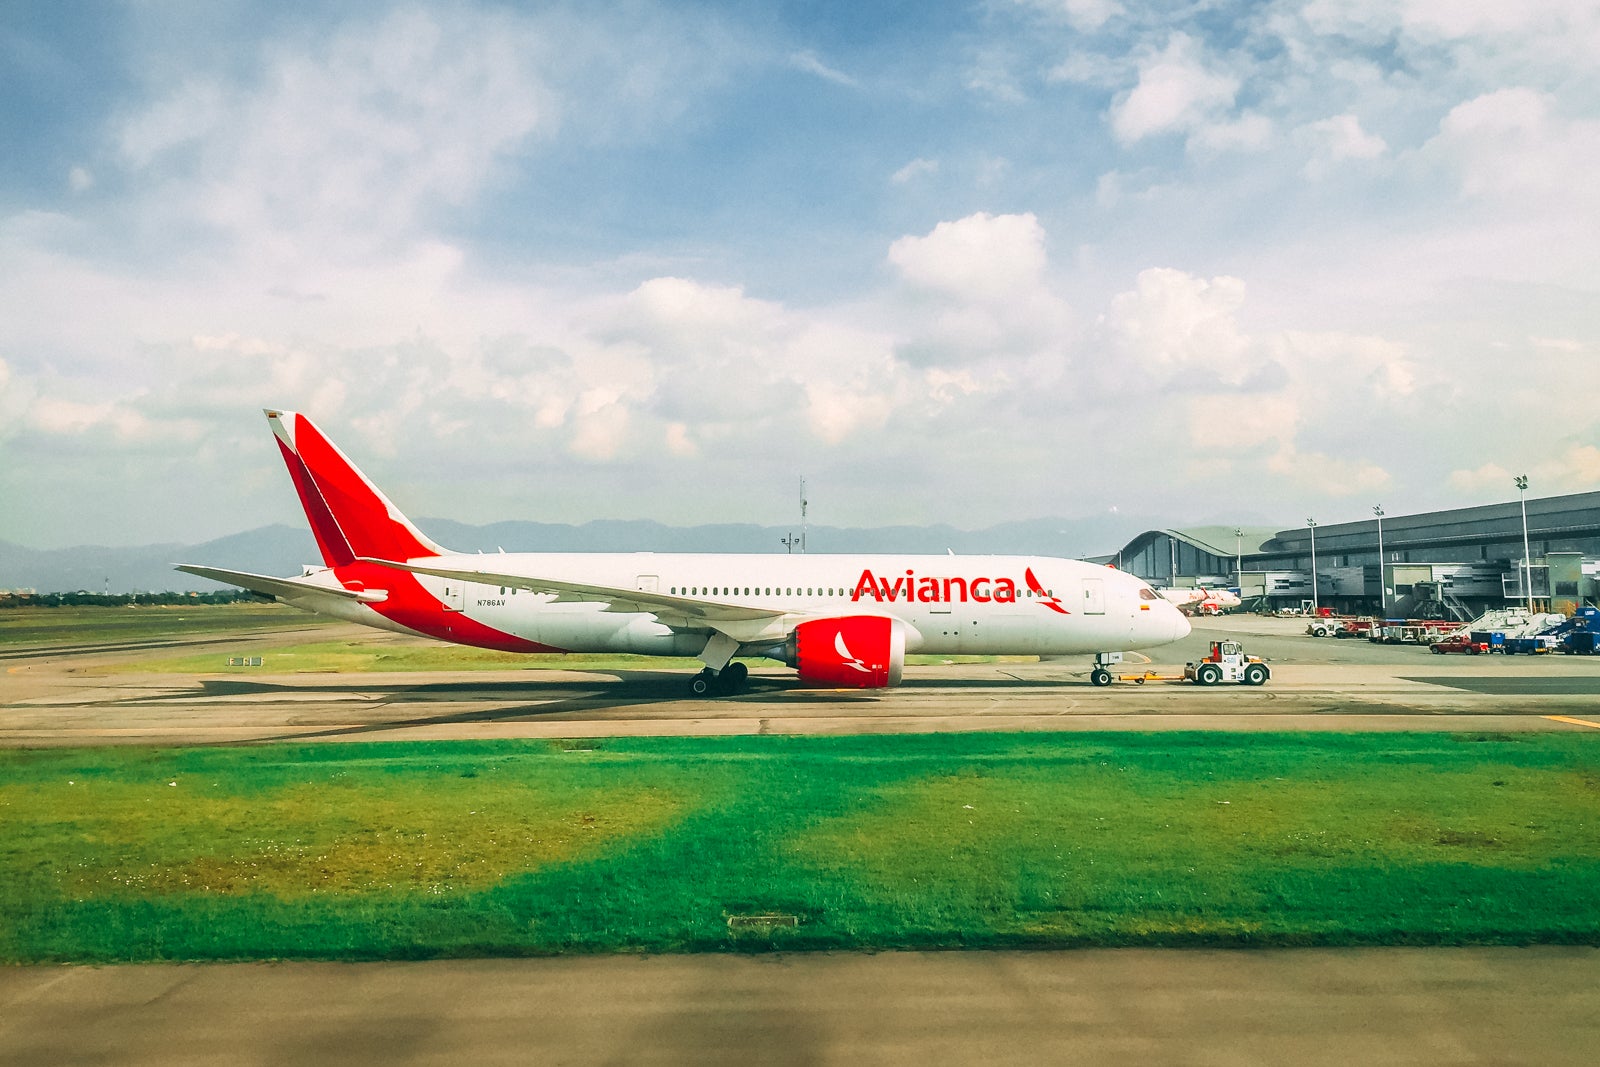 Avianca LifeMiles award sale promo: 2-for-1 tickets to South and Central America, 20% off flights to Europe